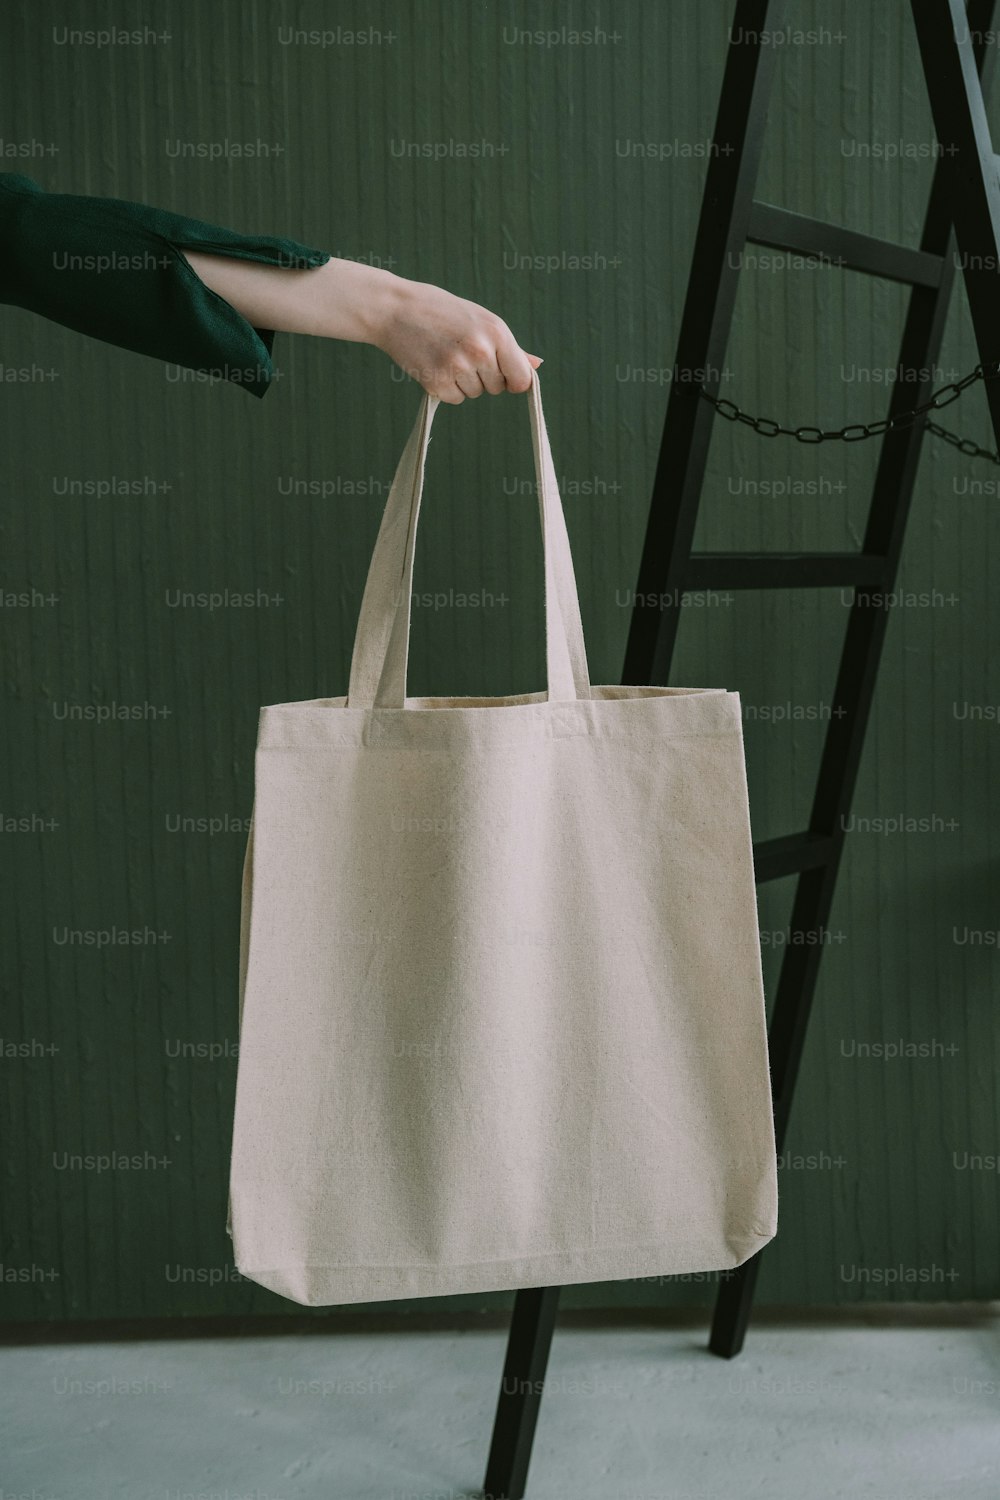 500+ Grocery Bag Pictures  Download Free Images on Unsplash